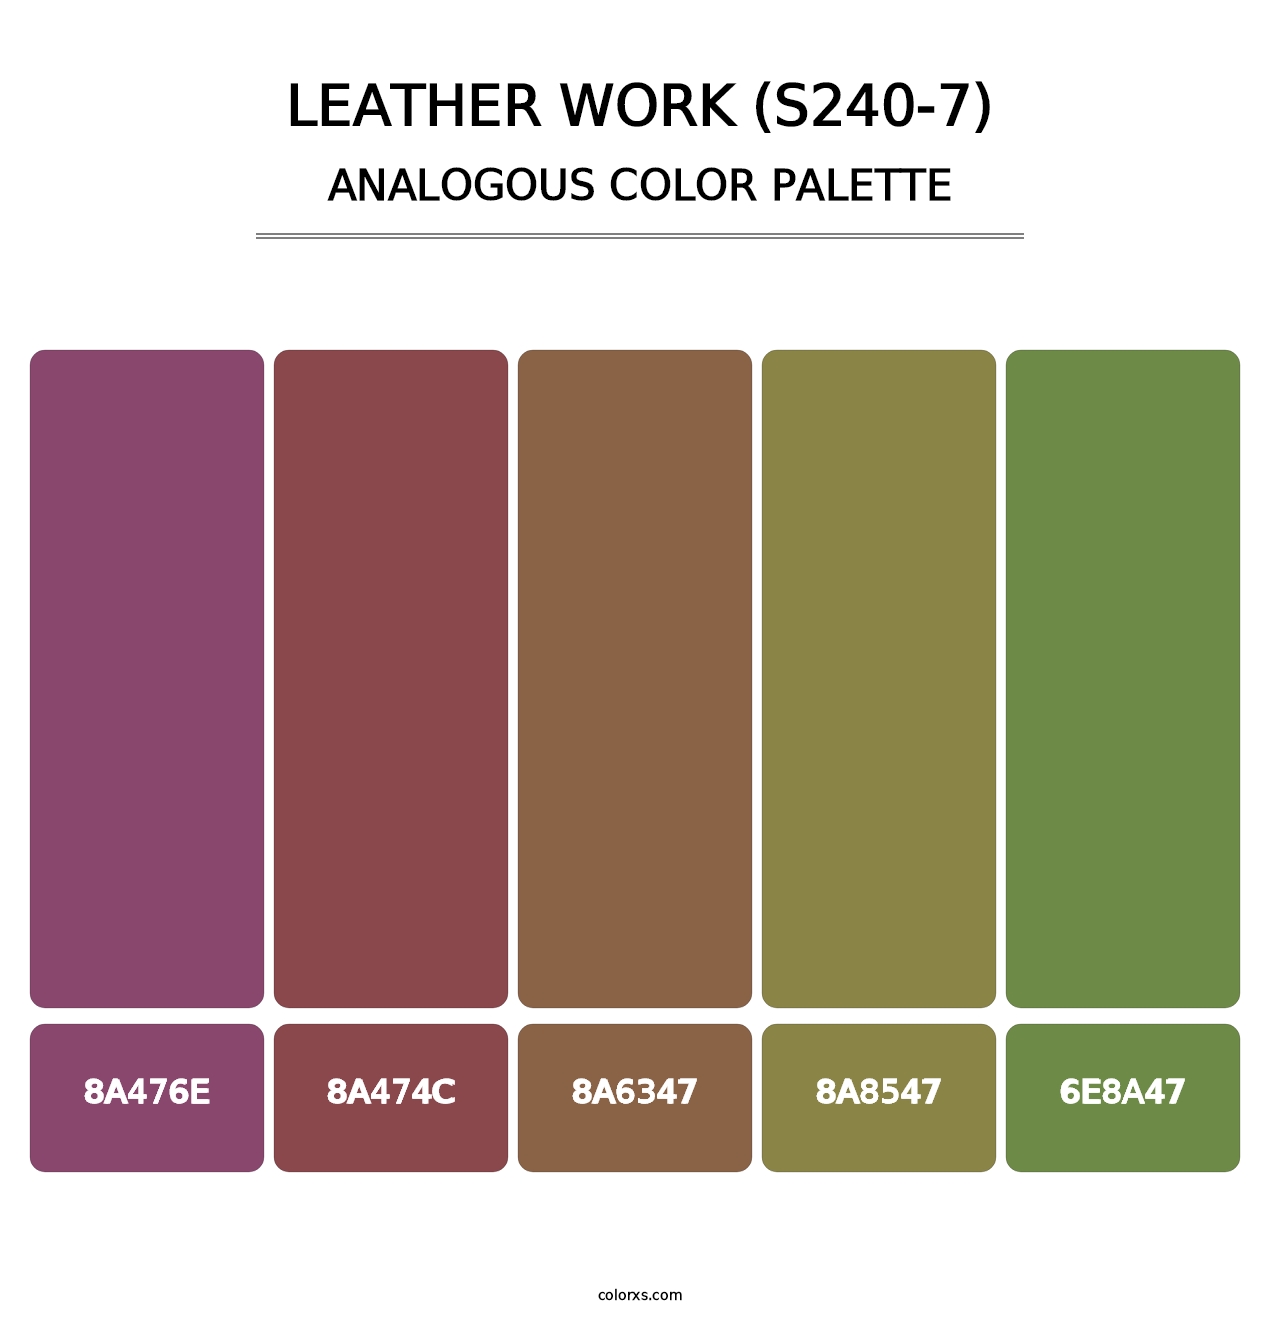 Leather Work (S240-7) - Analogous Color Palette